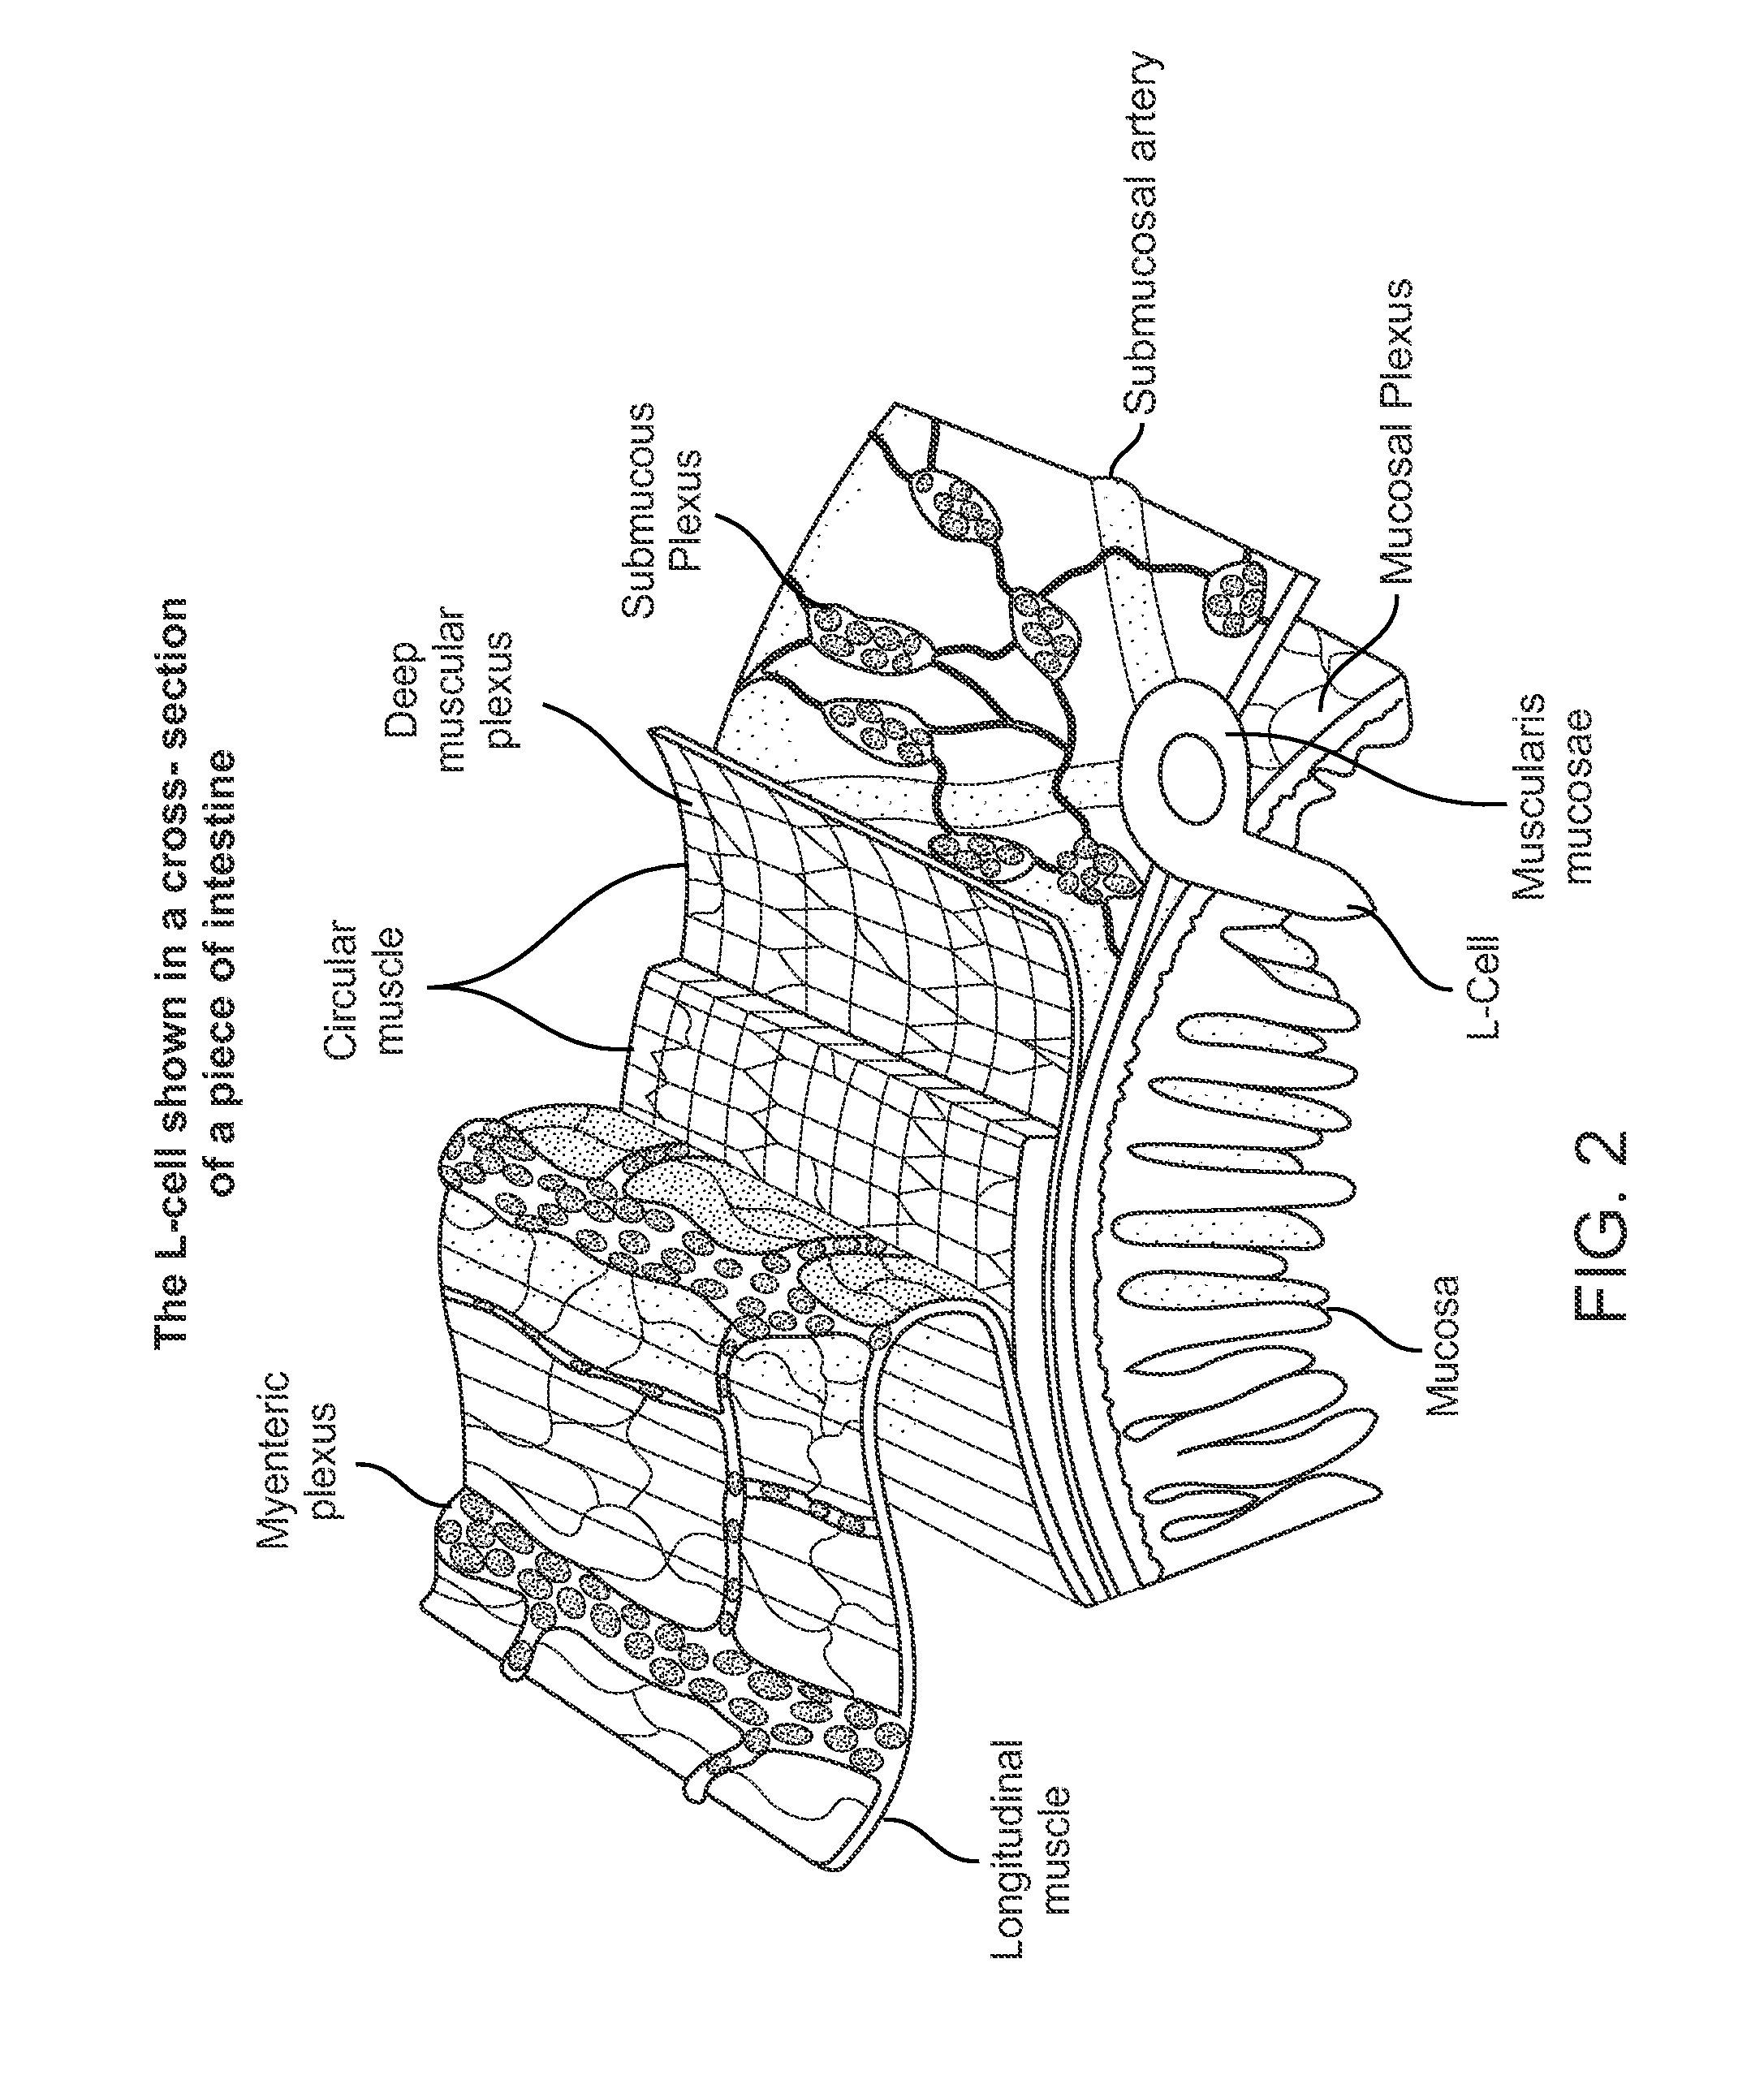 Swallowable capsule and method for stimulating incretin production within the intestinal tract